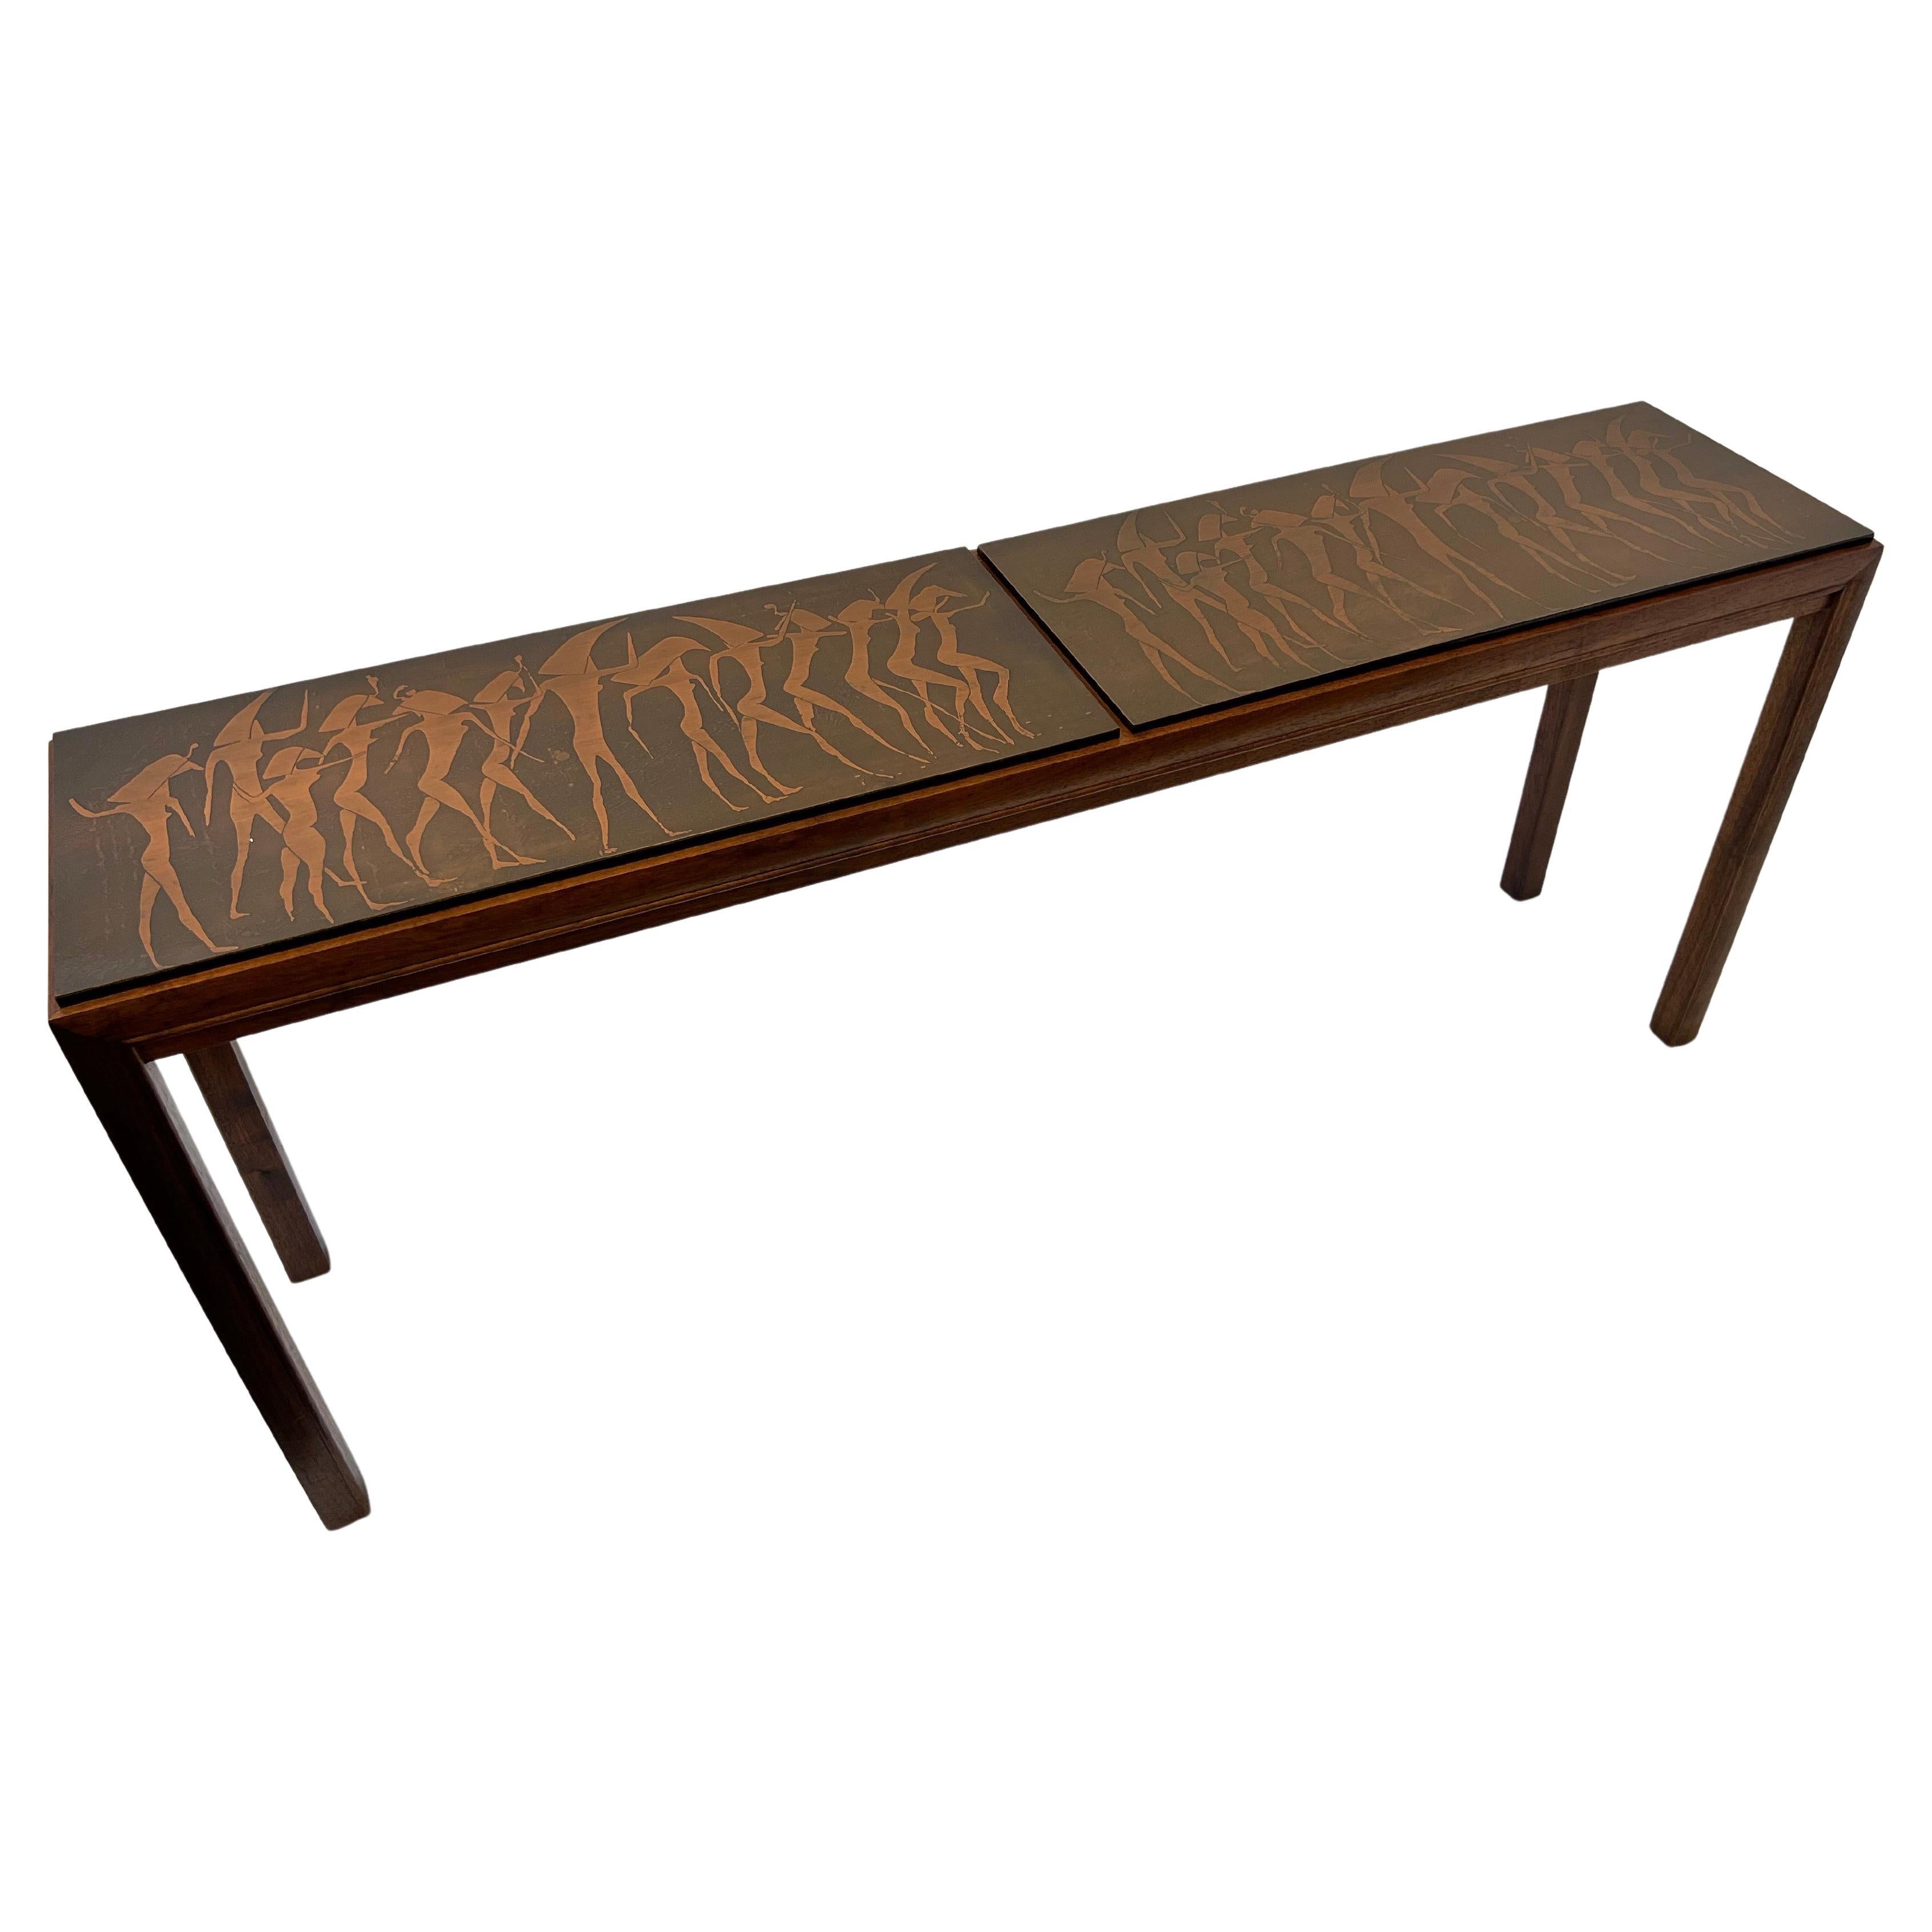 Italian Brutalist Walnut and Copper Console Table by G. Urso For Sale